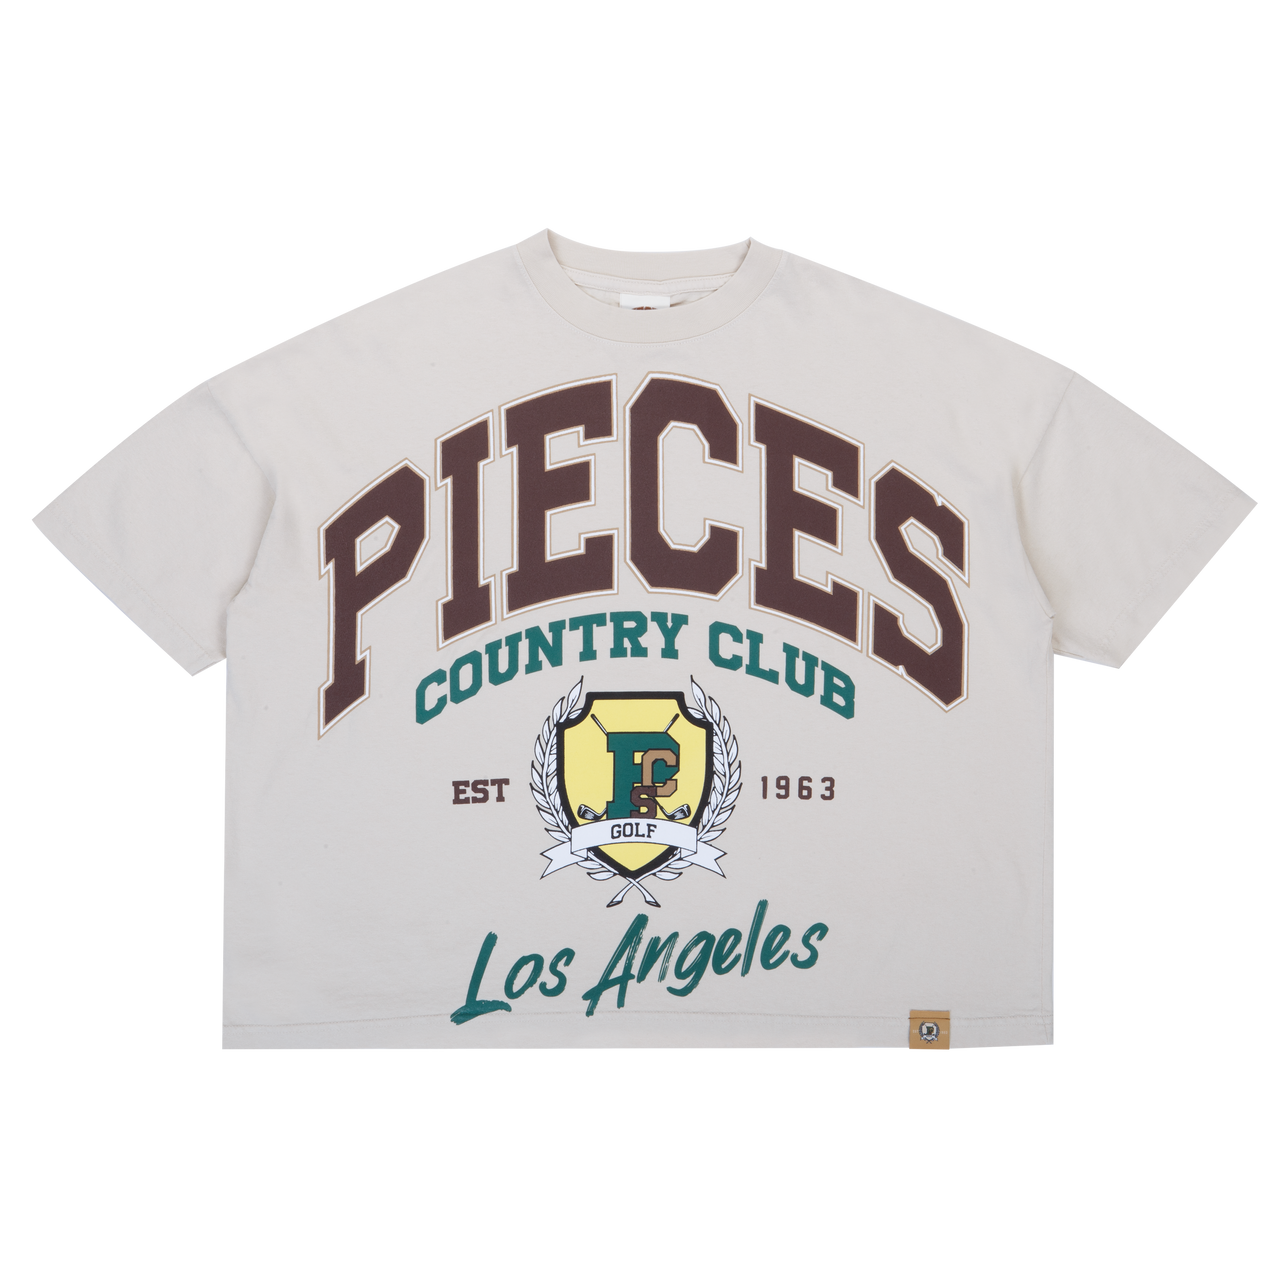 Pieces Country Club Tee Cream